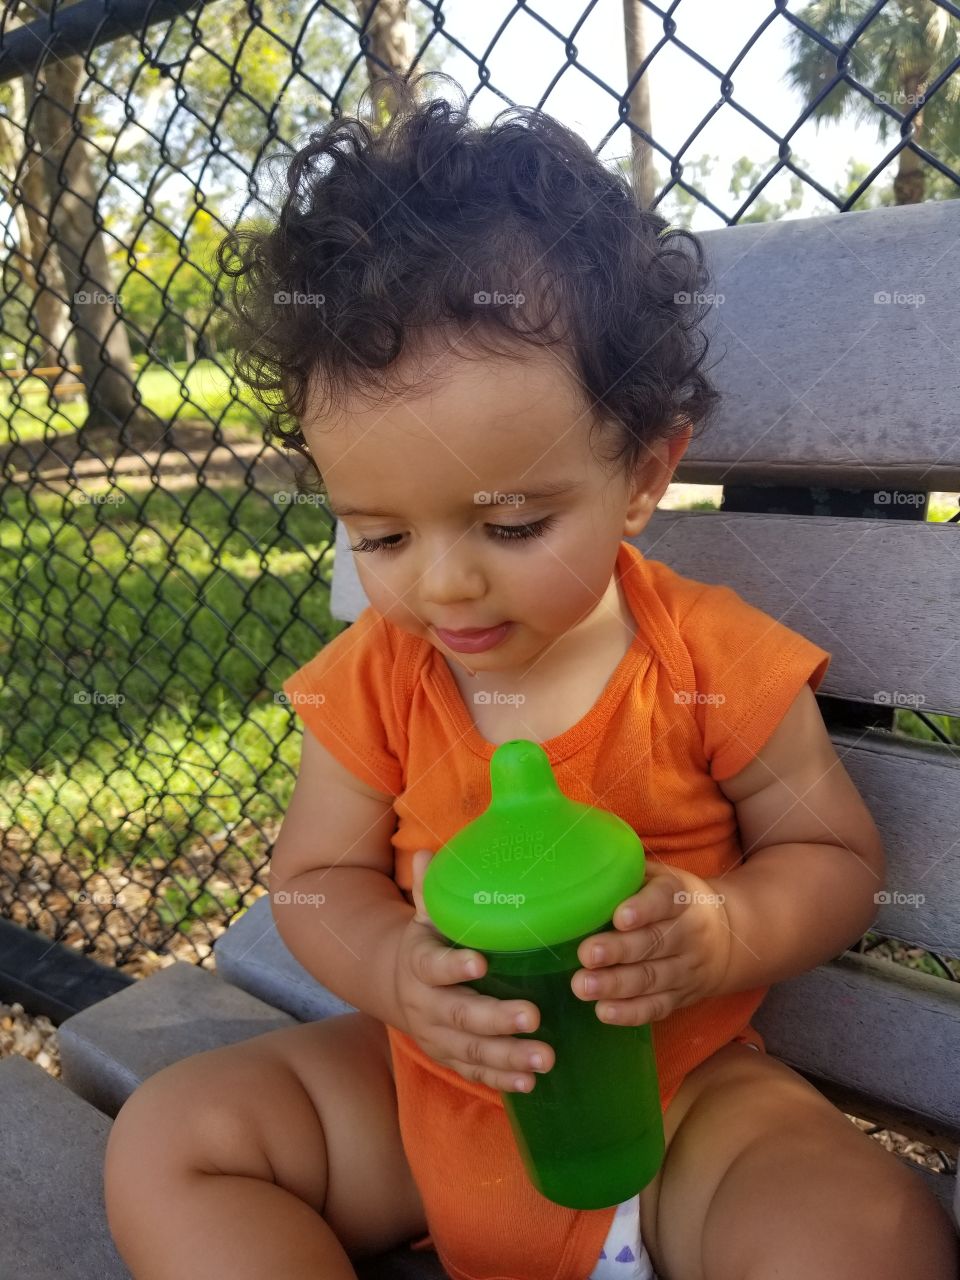 Baby With Bottle